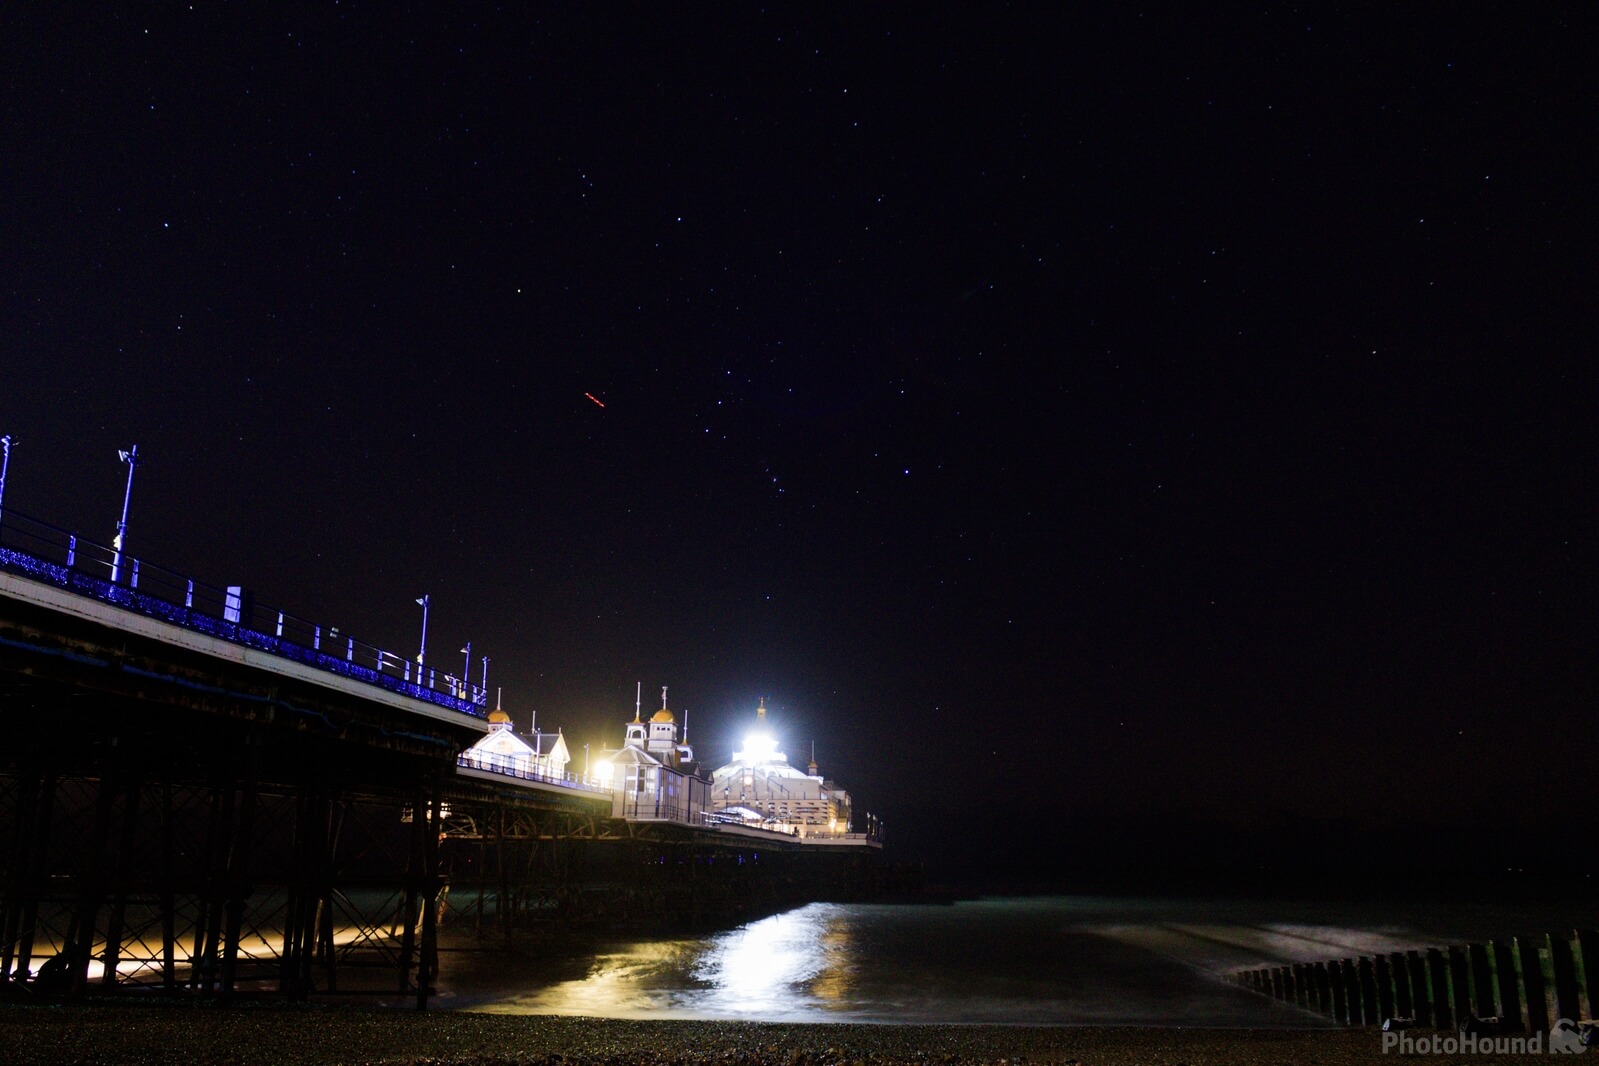 Image of Eastbourne Pier by Richard Joiner